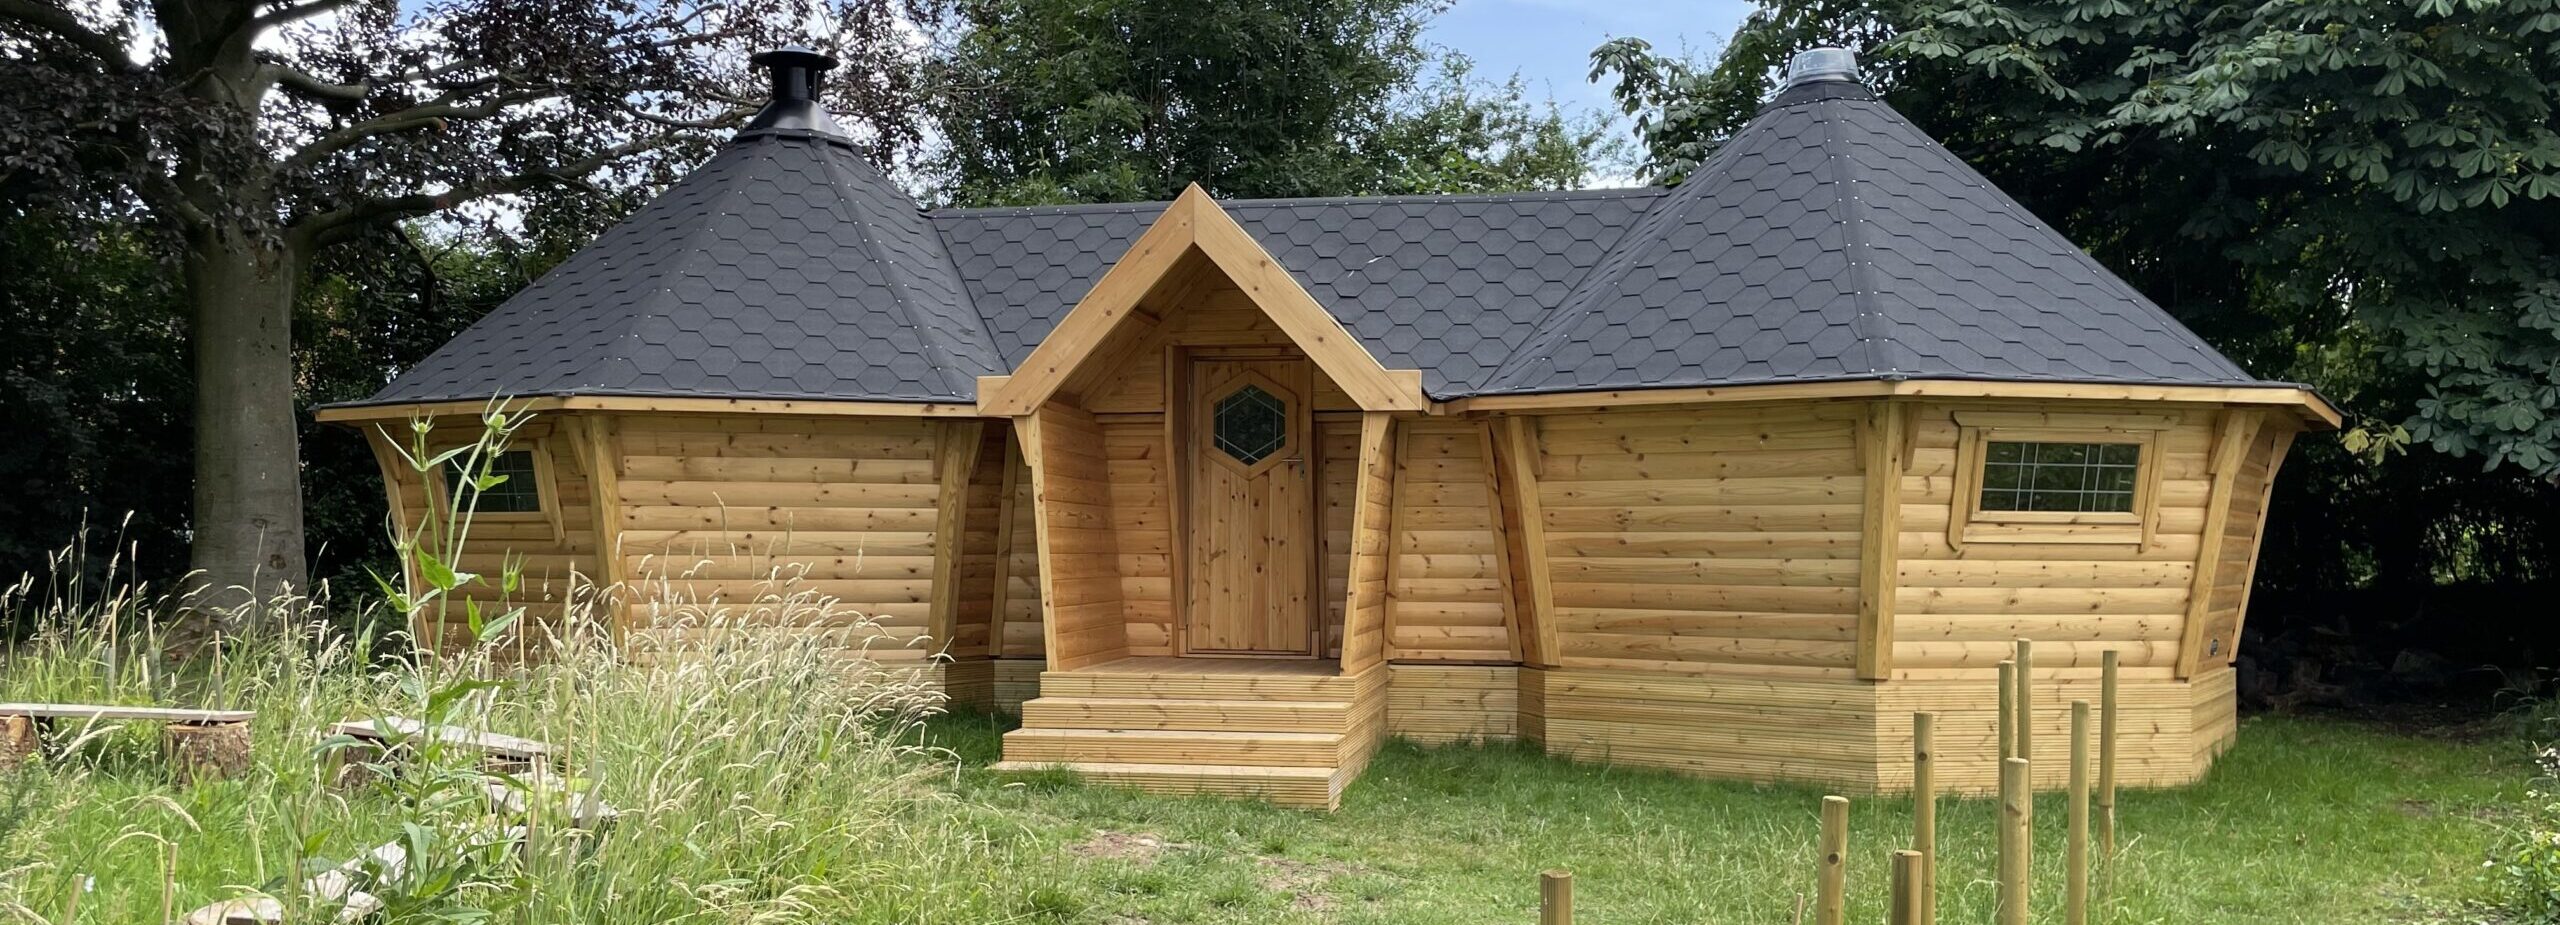 Joint cabins in Cutnall Green school by Cabin For Schools for forest learning funded by crowdfunding